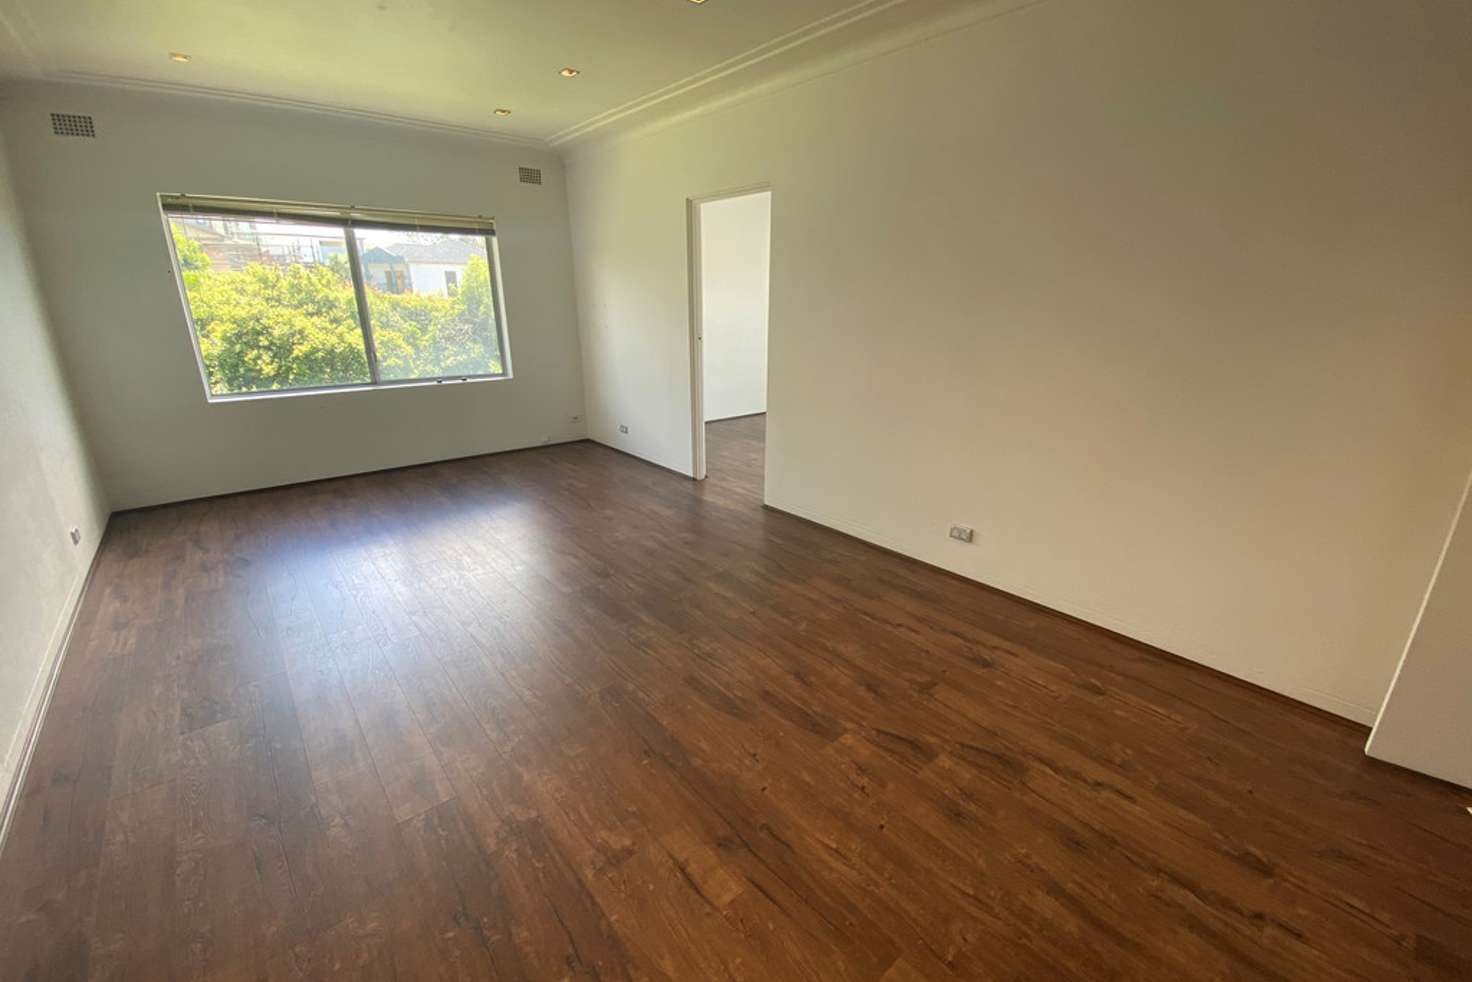 Main view of Homely unit listing, 7/178 Wardell Rd, Earlwood NSW 2206